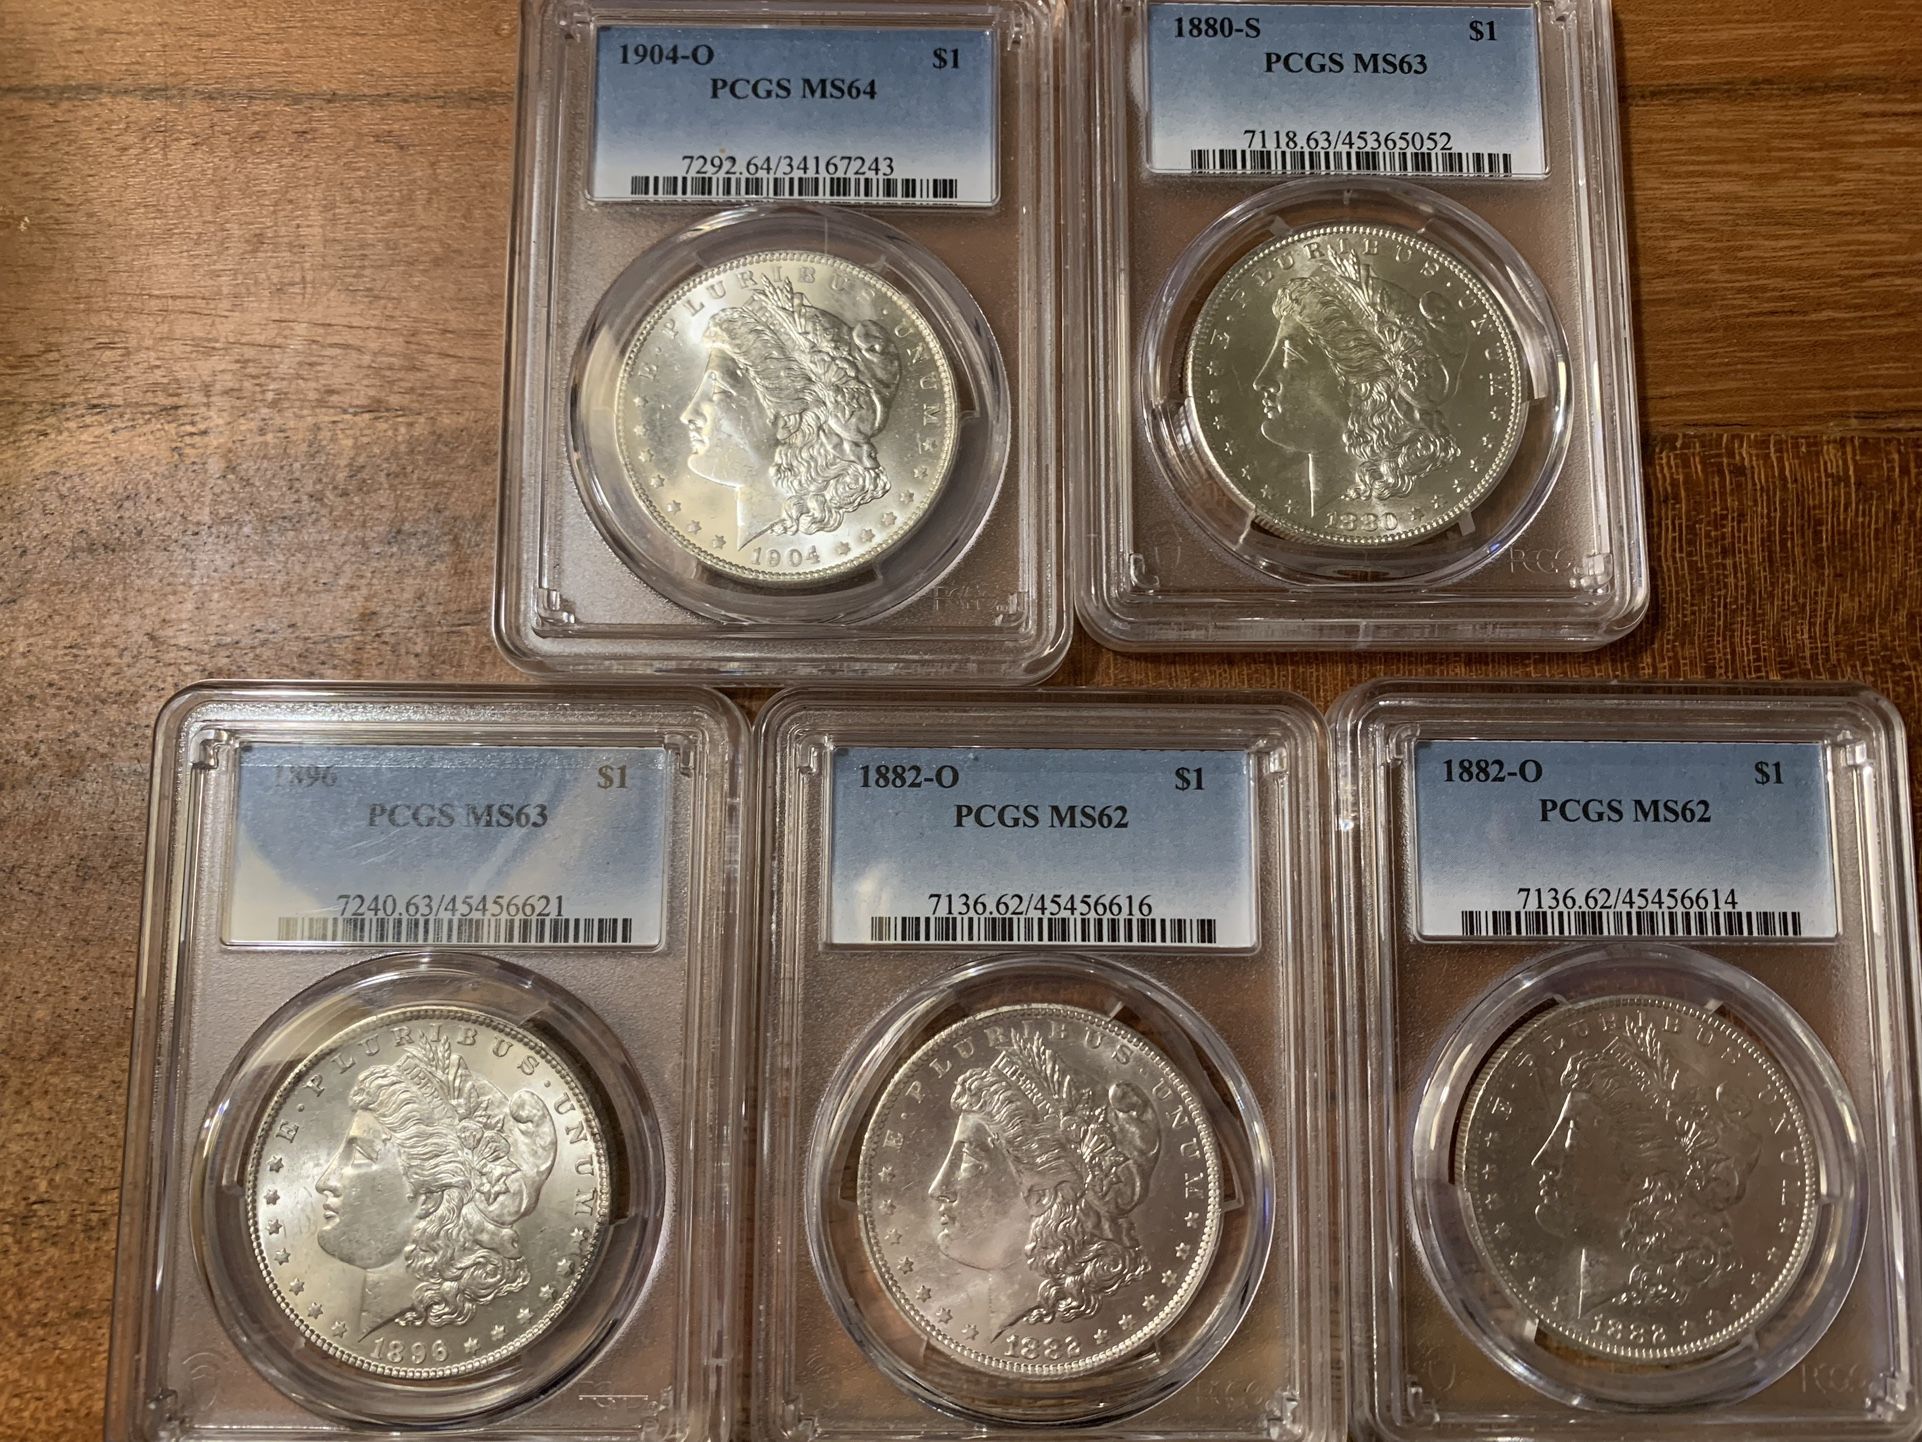 PCGS Certified Morgan Silver Dollar Coins